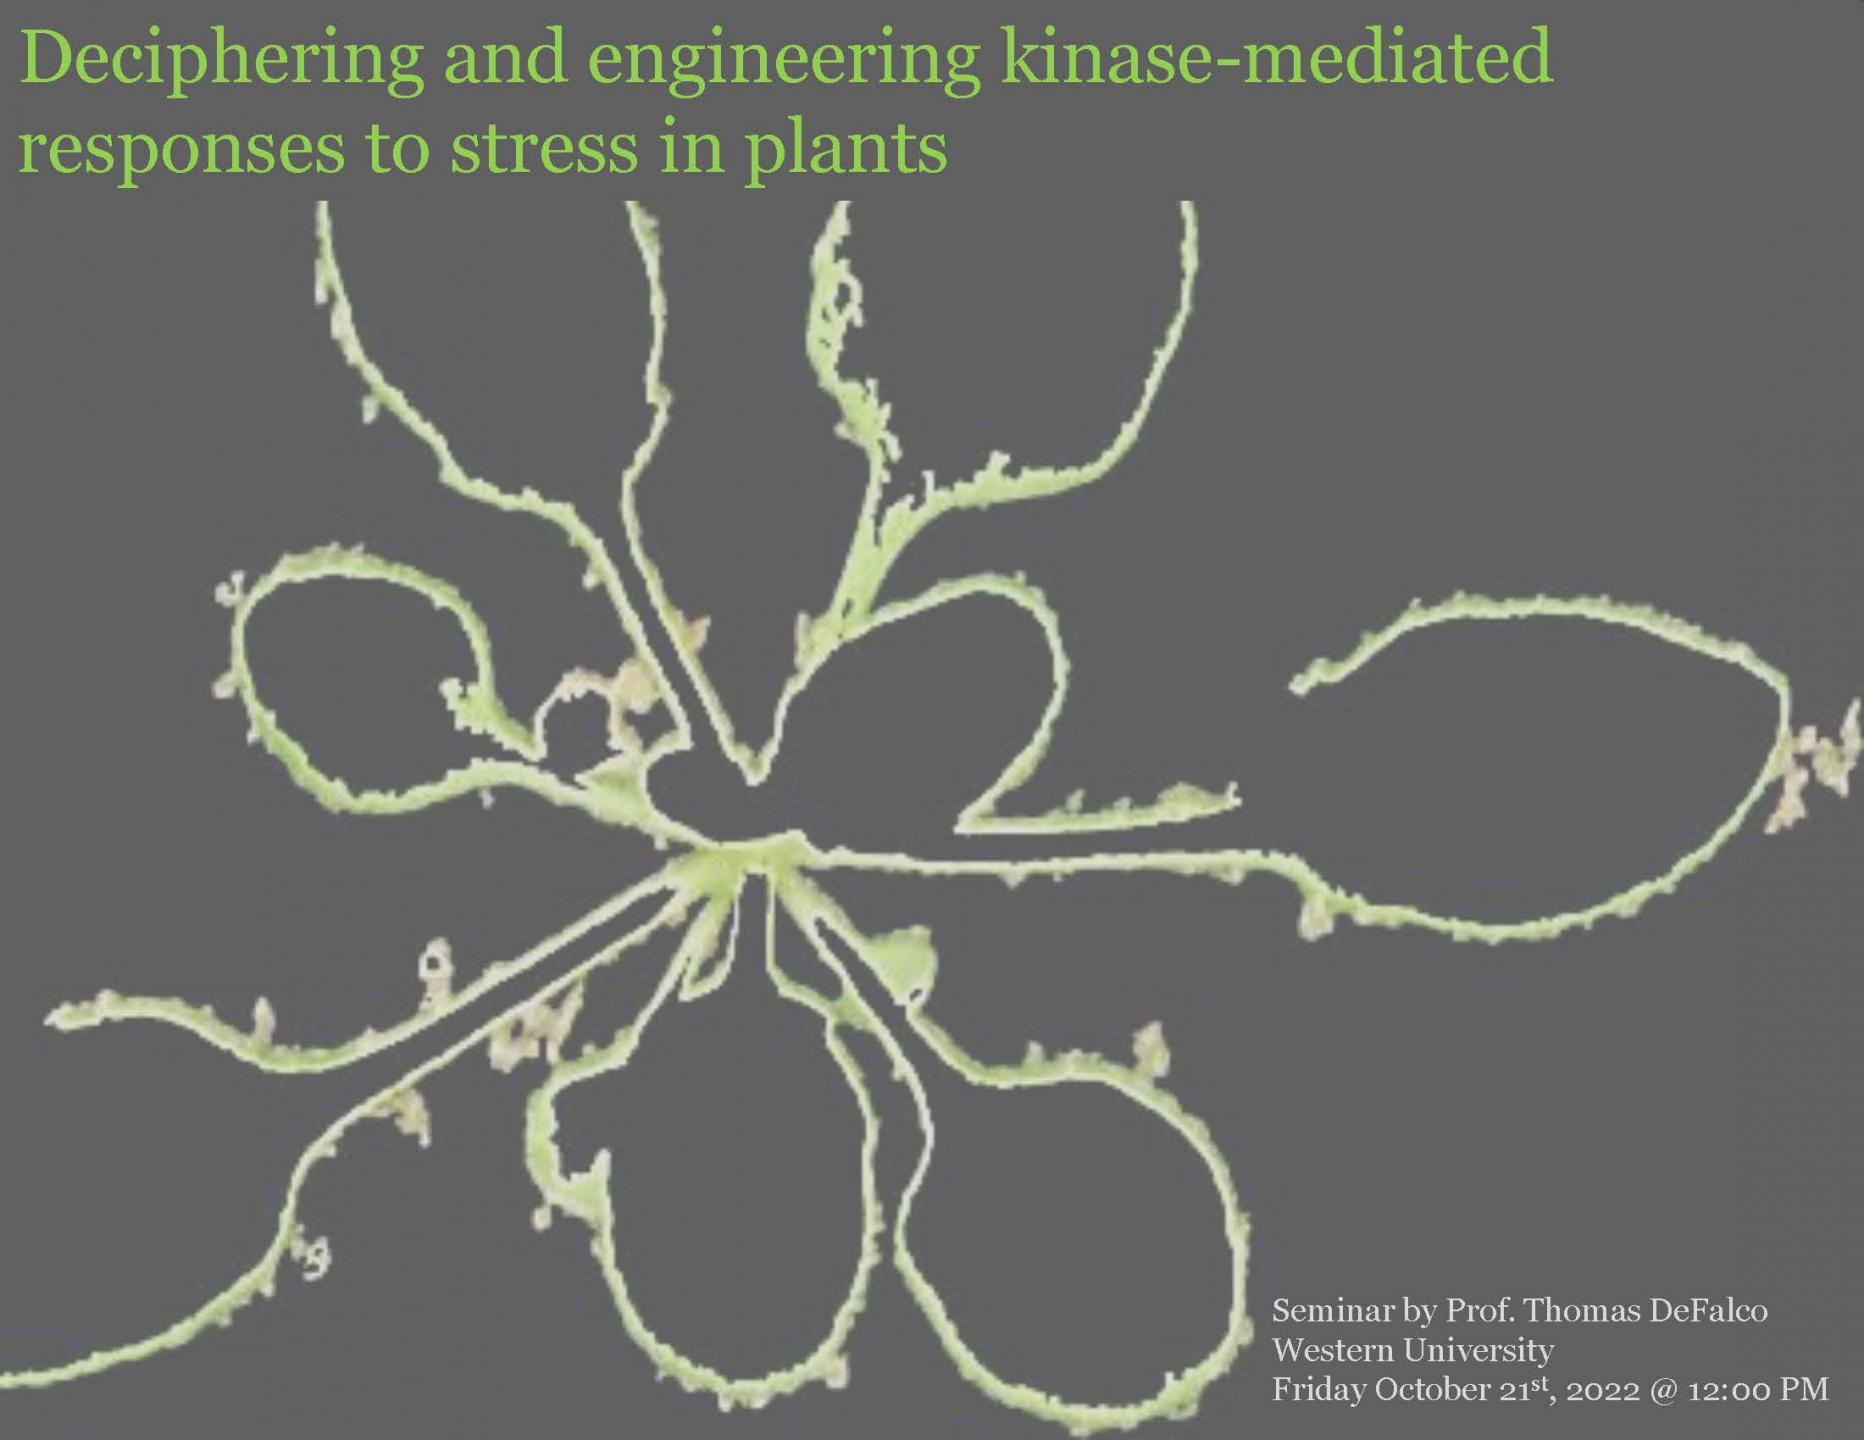 Deciphering and engineering kinase-mediated responses to stress in plants - Presented by Prof. Thomas Defalco